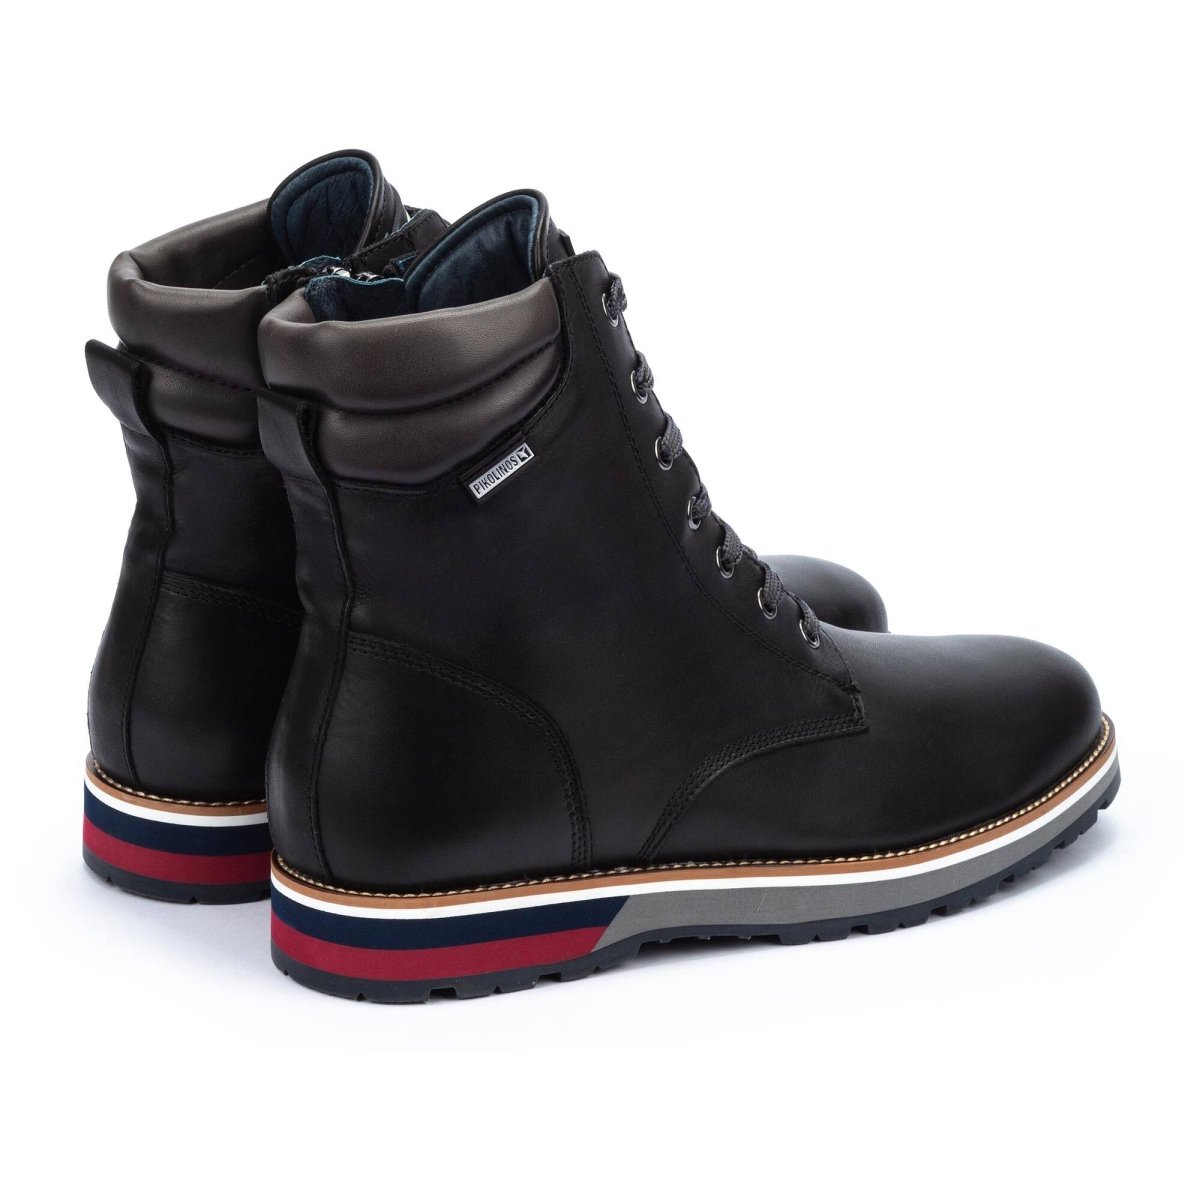 PIKOLINOS PIRINEOS M6S-N8113 MEN'S WARM LINING ANKLE BOOTS IN BLACK - TLW Shoes